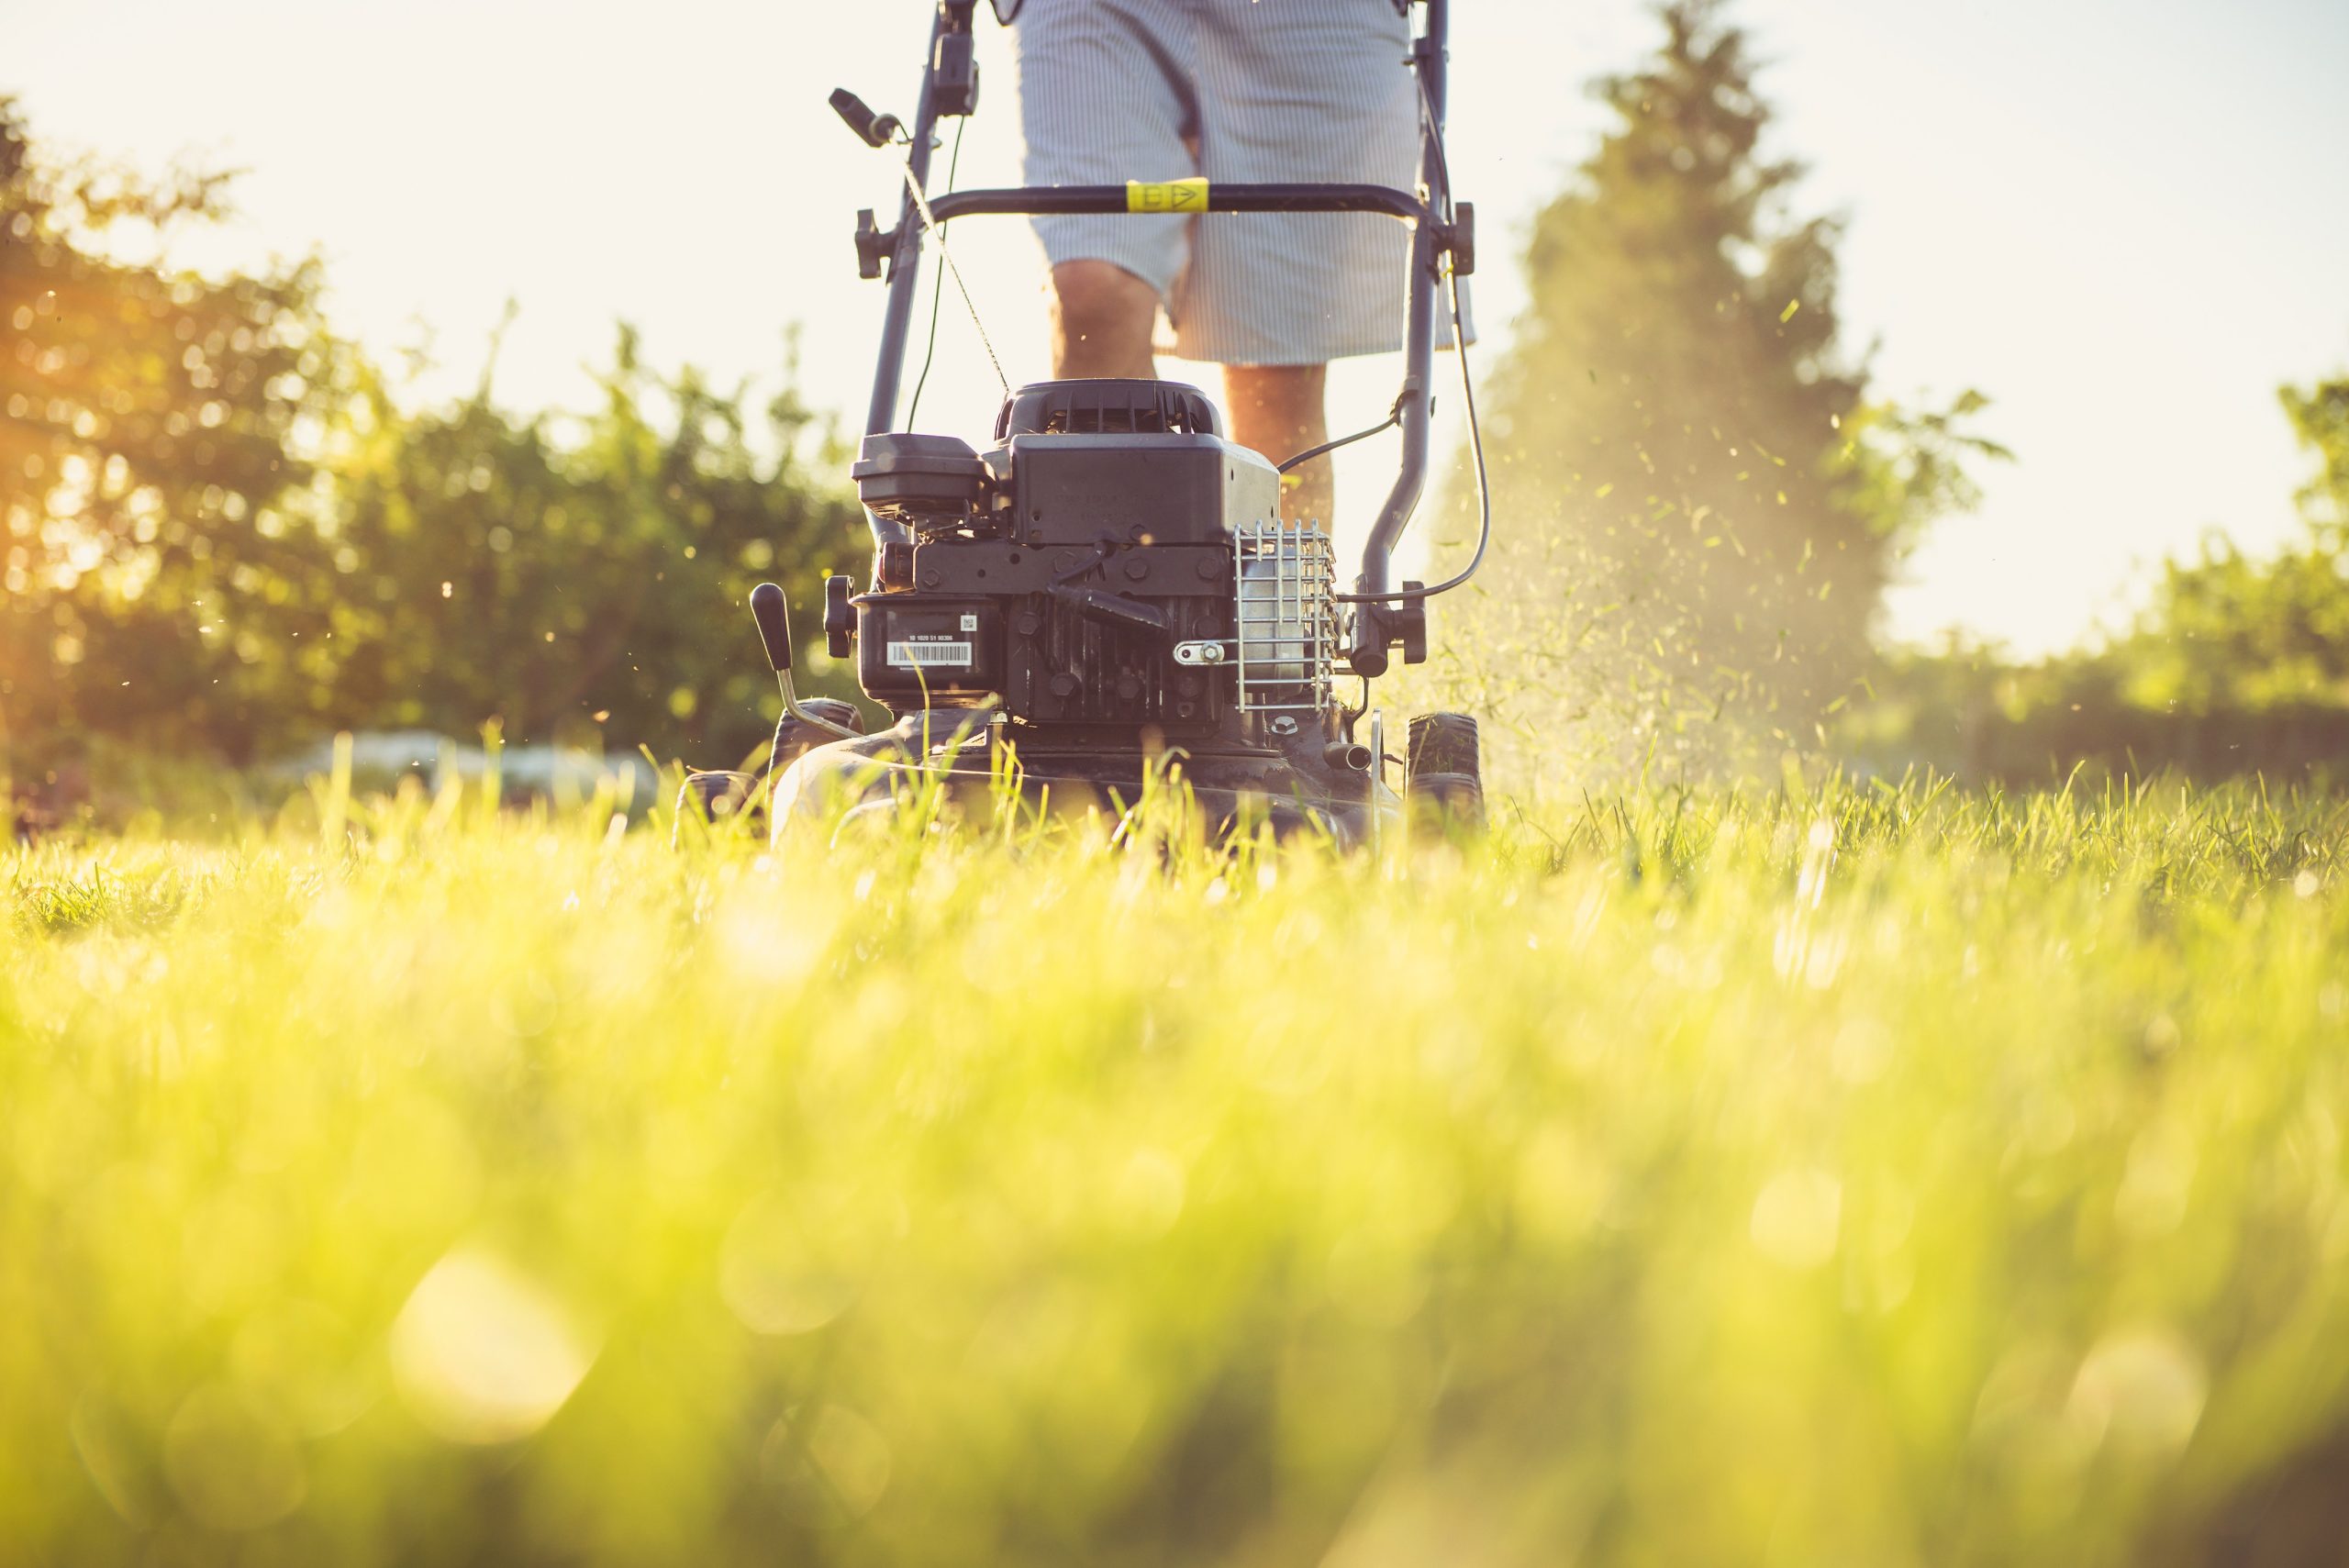 A Complete Guide to Help You Understand Everything About Lawn Maintenance